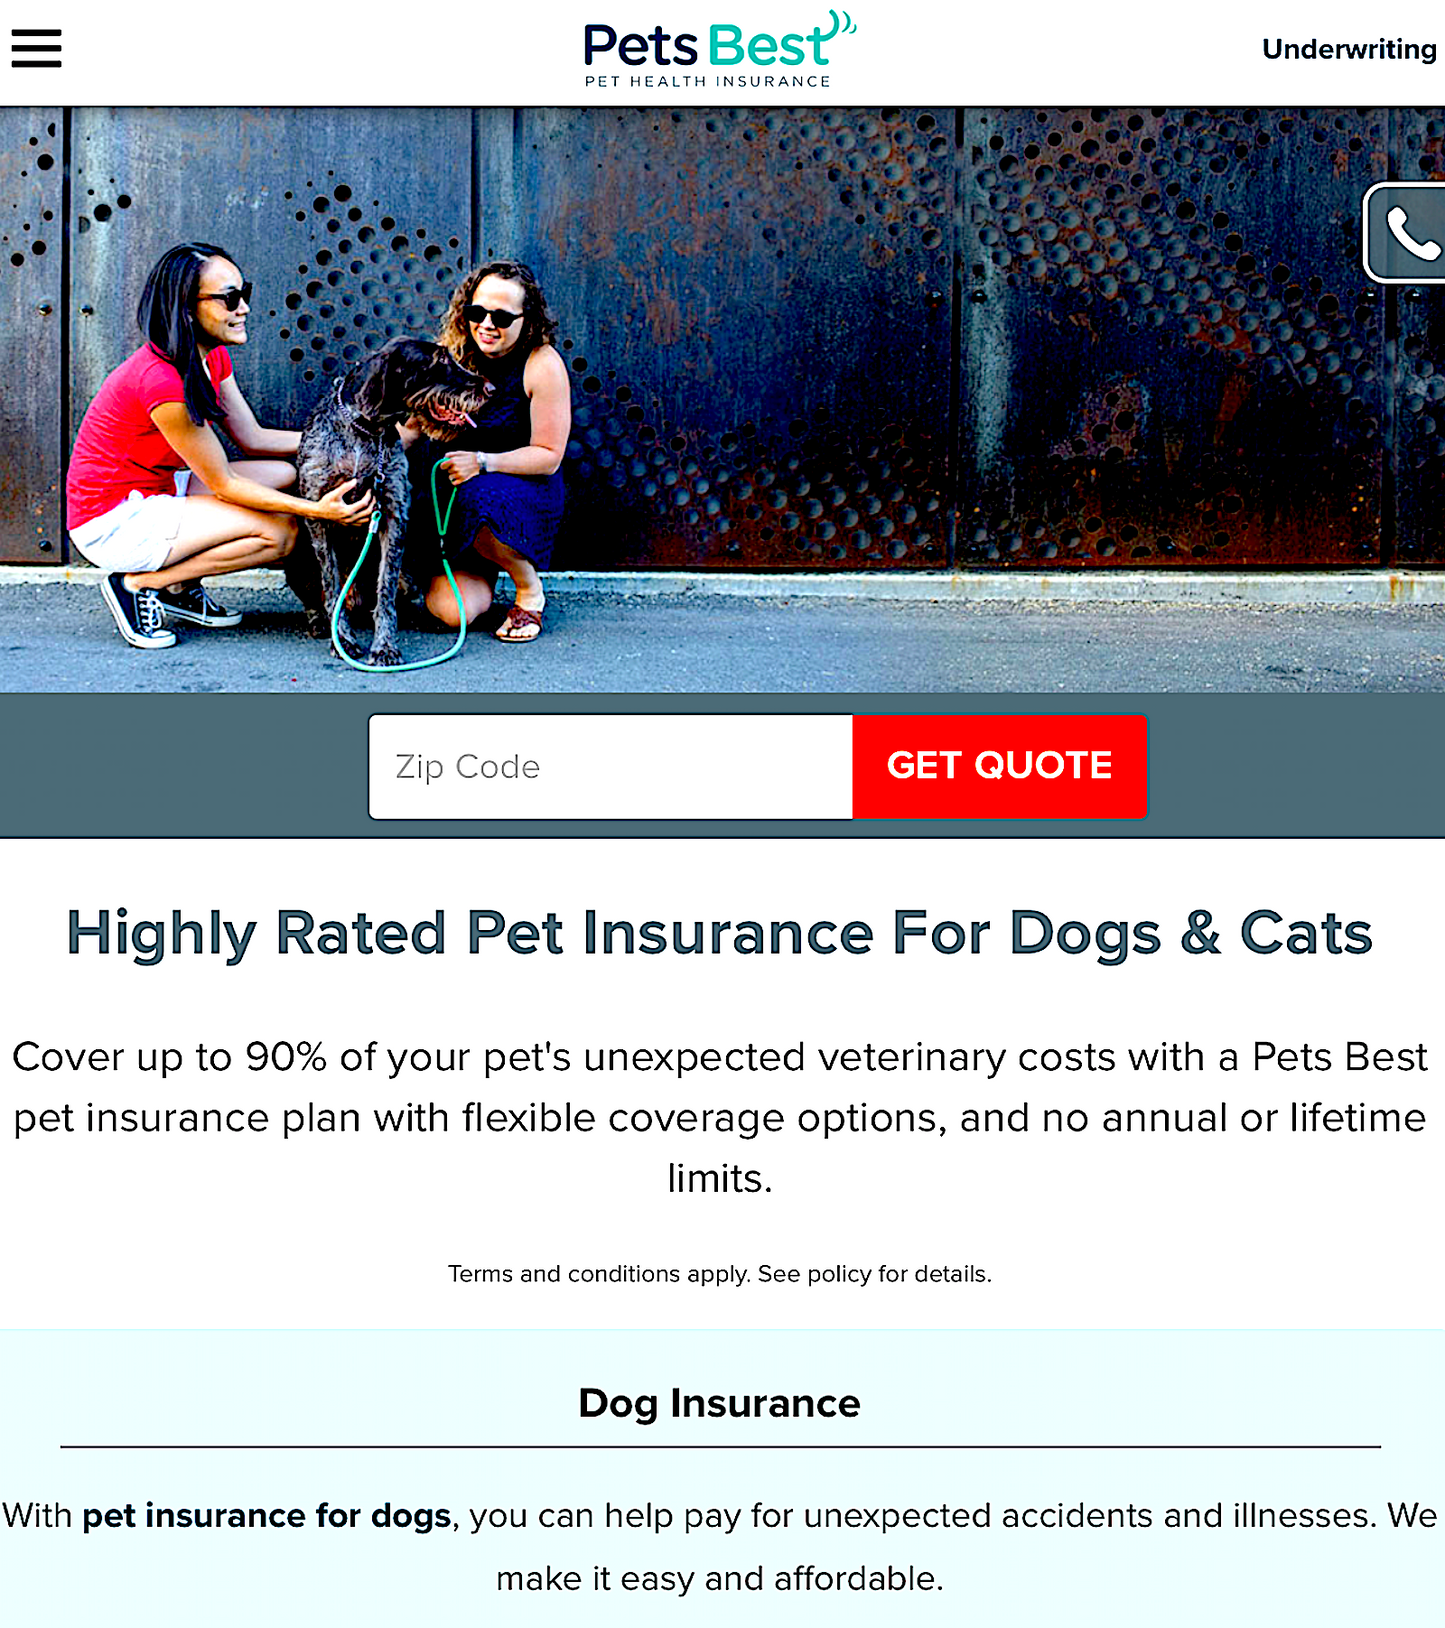 PETS BEST INSURANCE: simply the best for your pet - Vital Vet